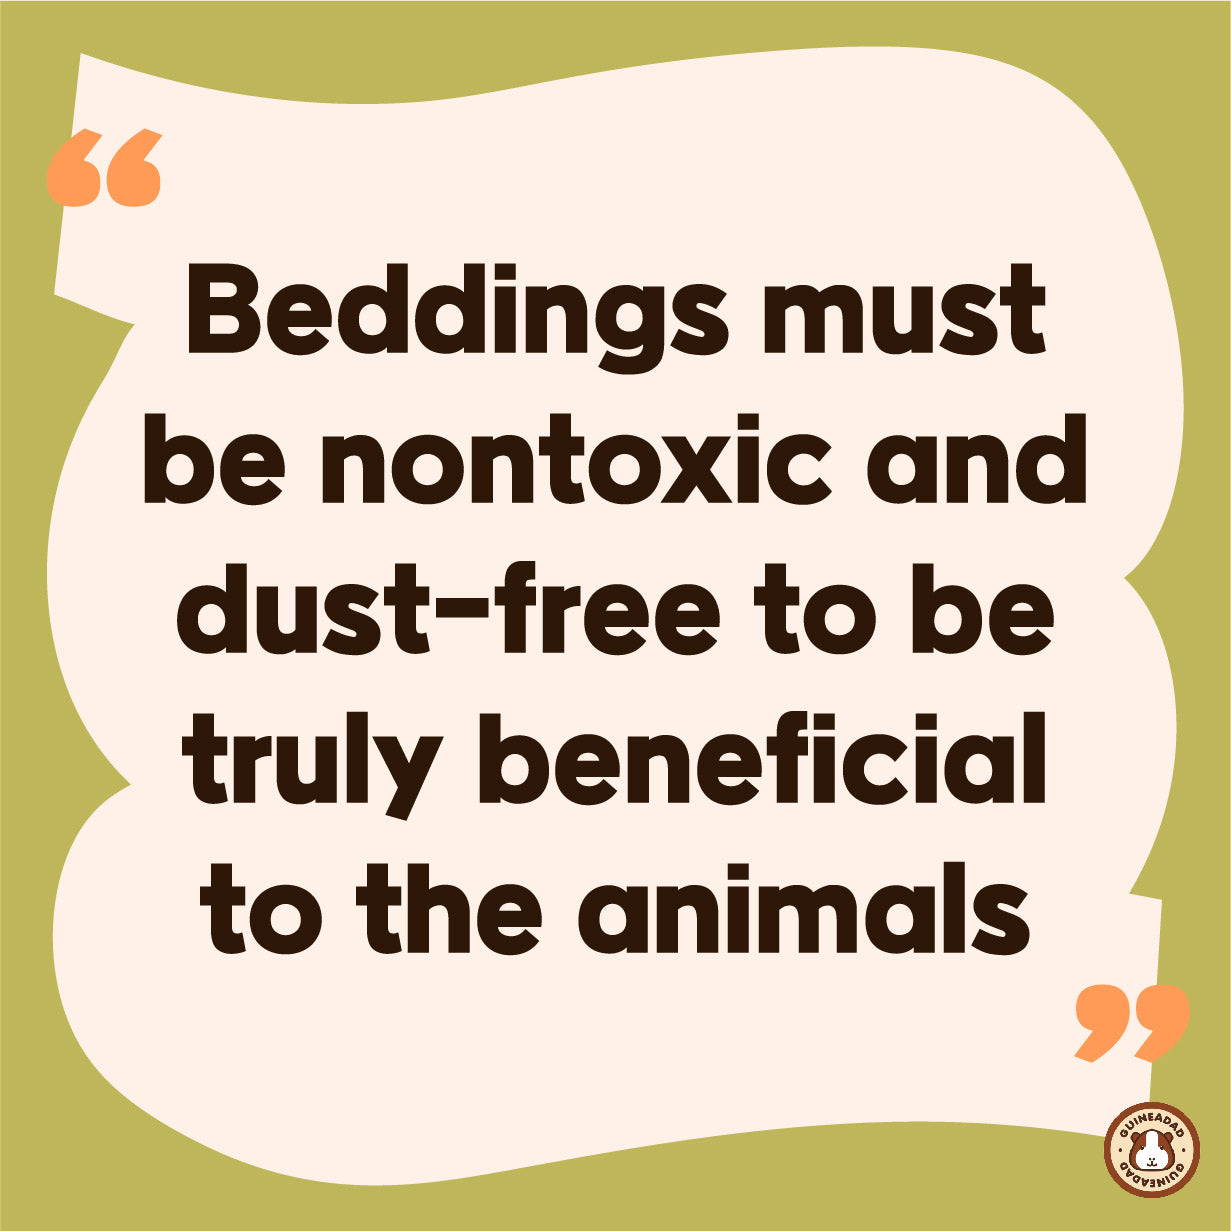 Beddings must be nontoxic and dust-free to be truly beneficial to the animals